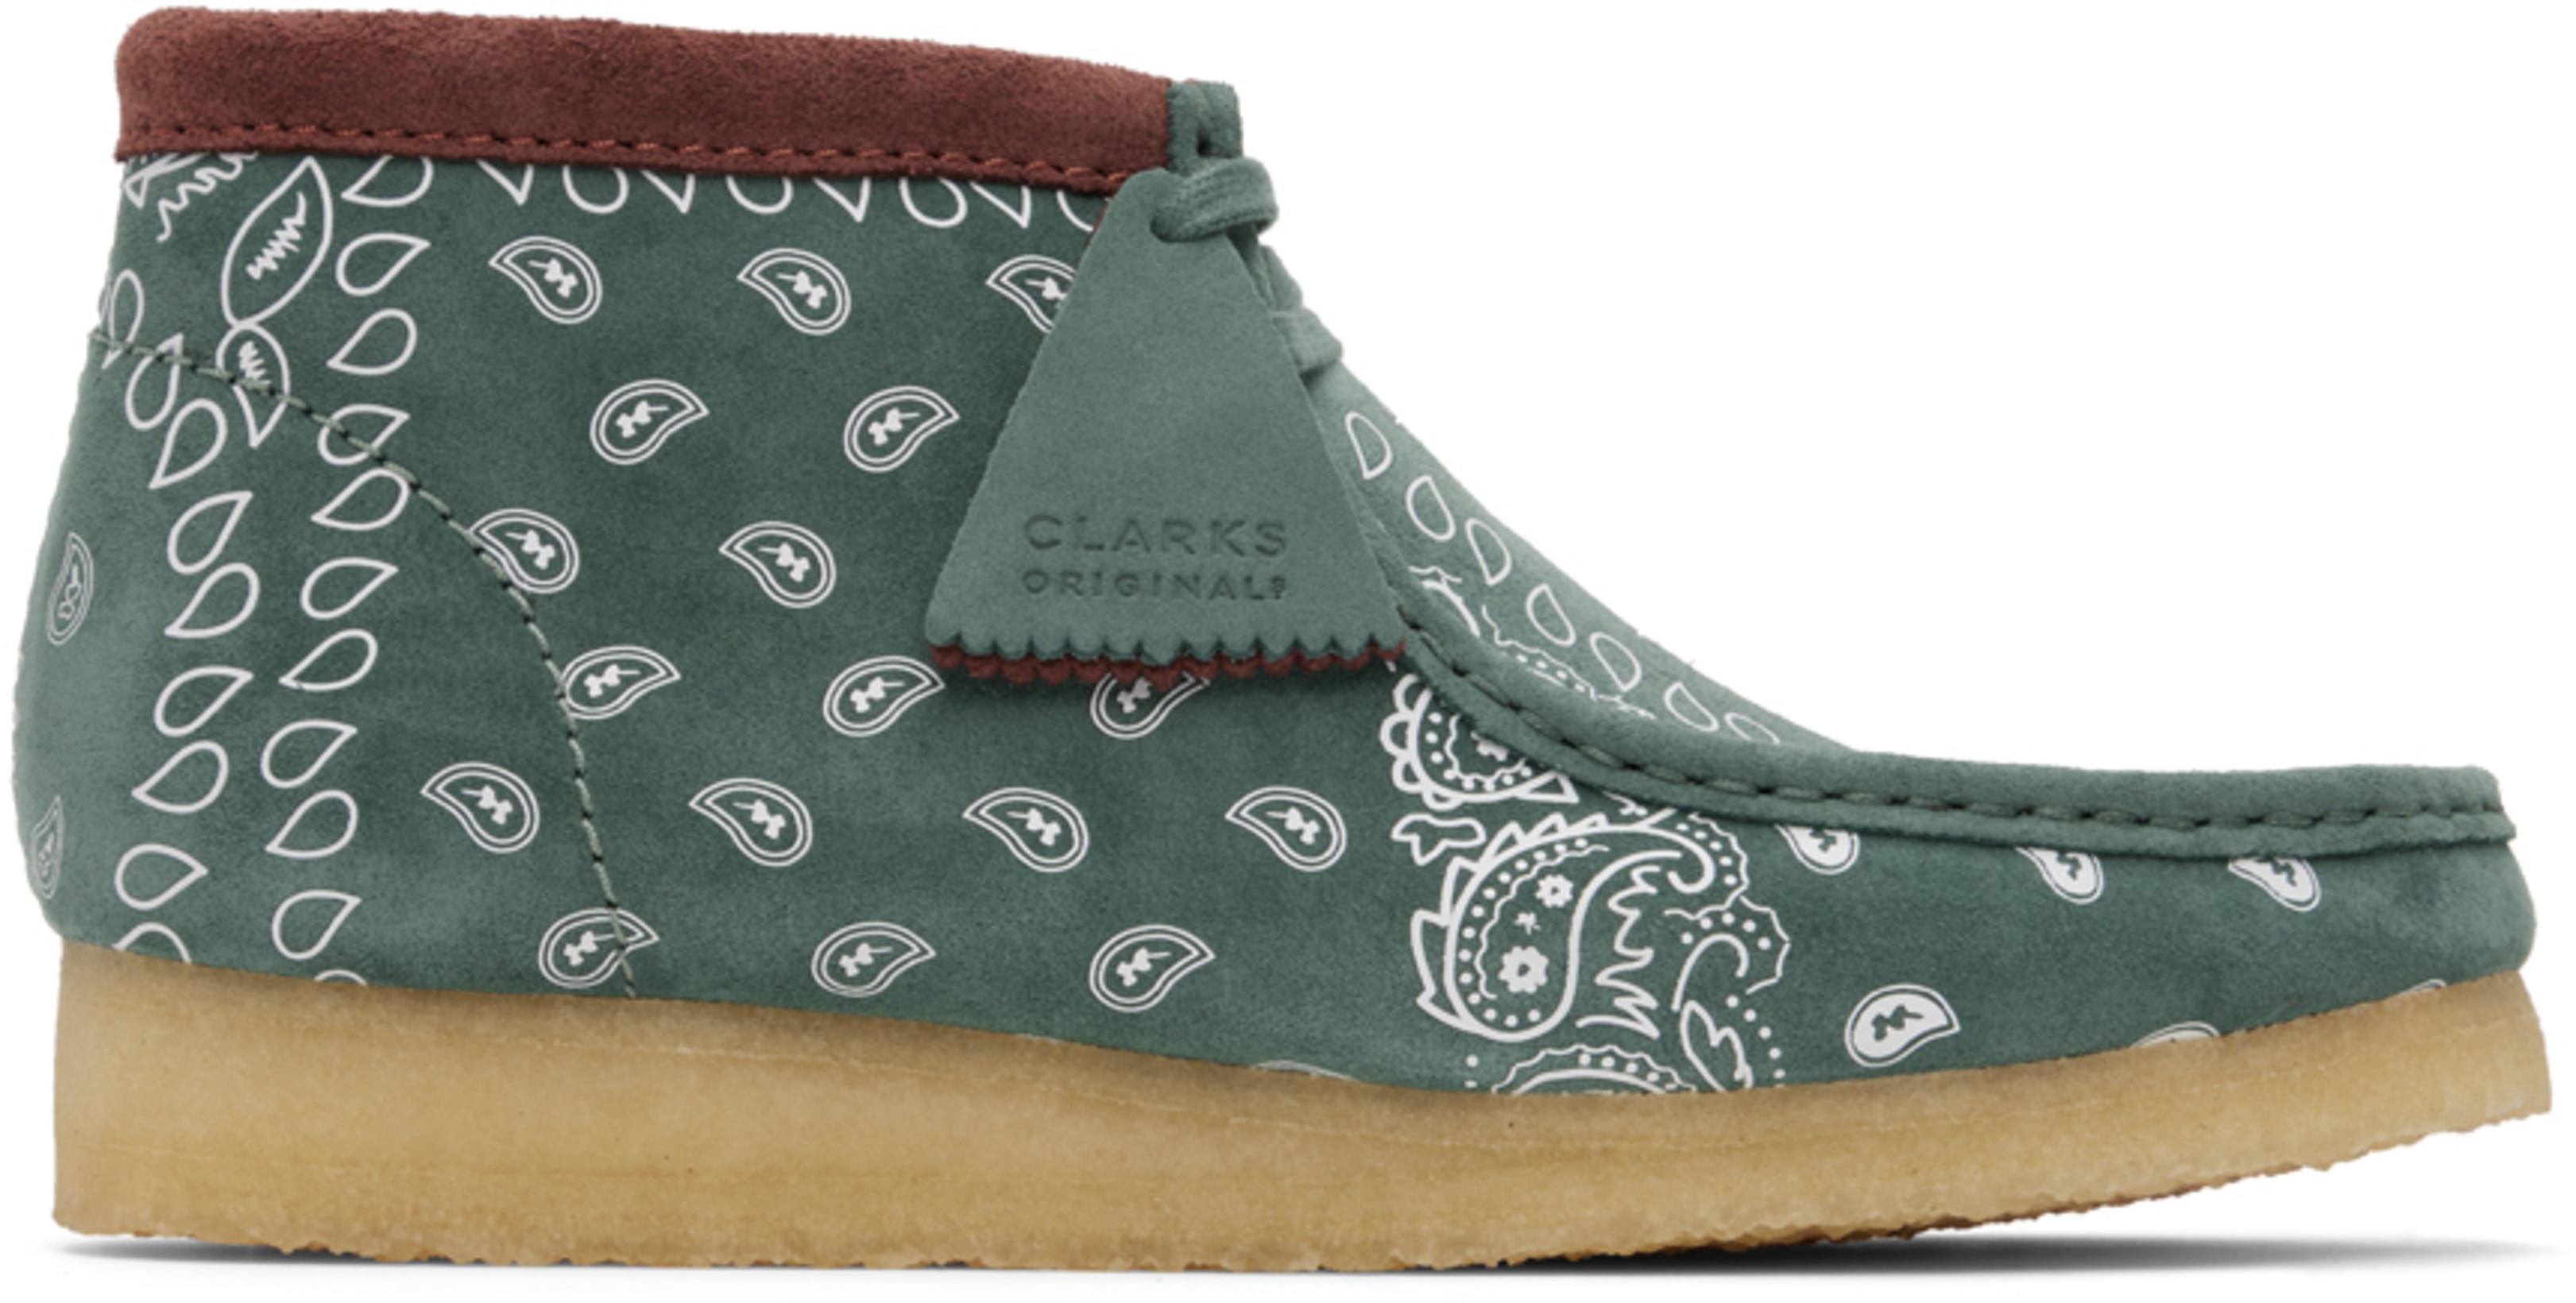 Green Paisley Wallabee Boots by CLARKS ORIGINALS